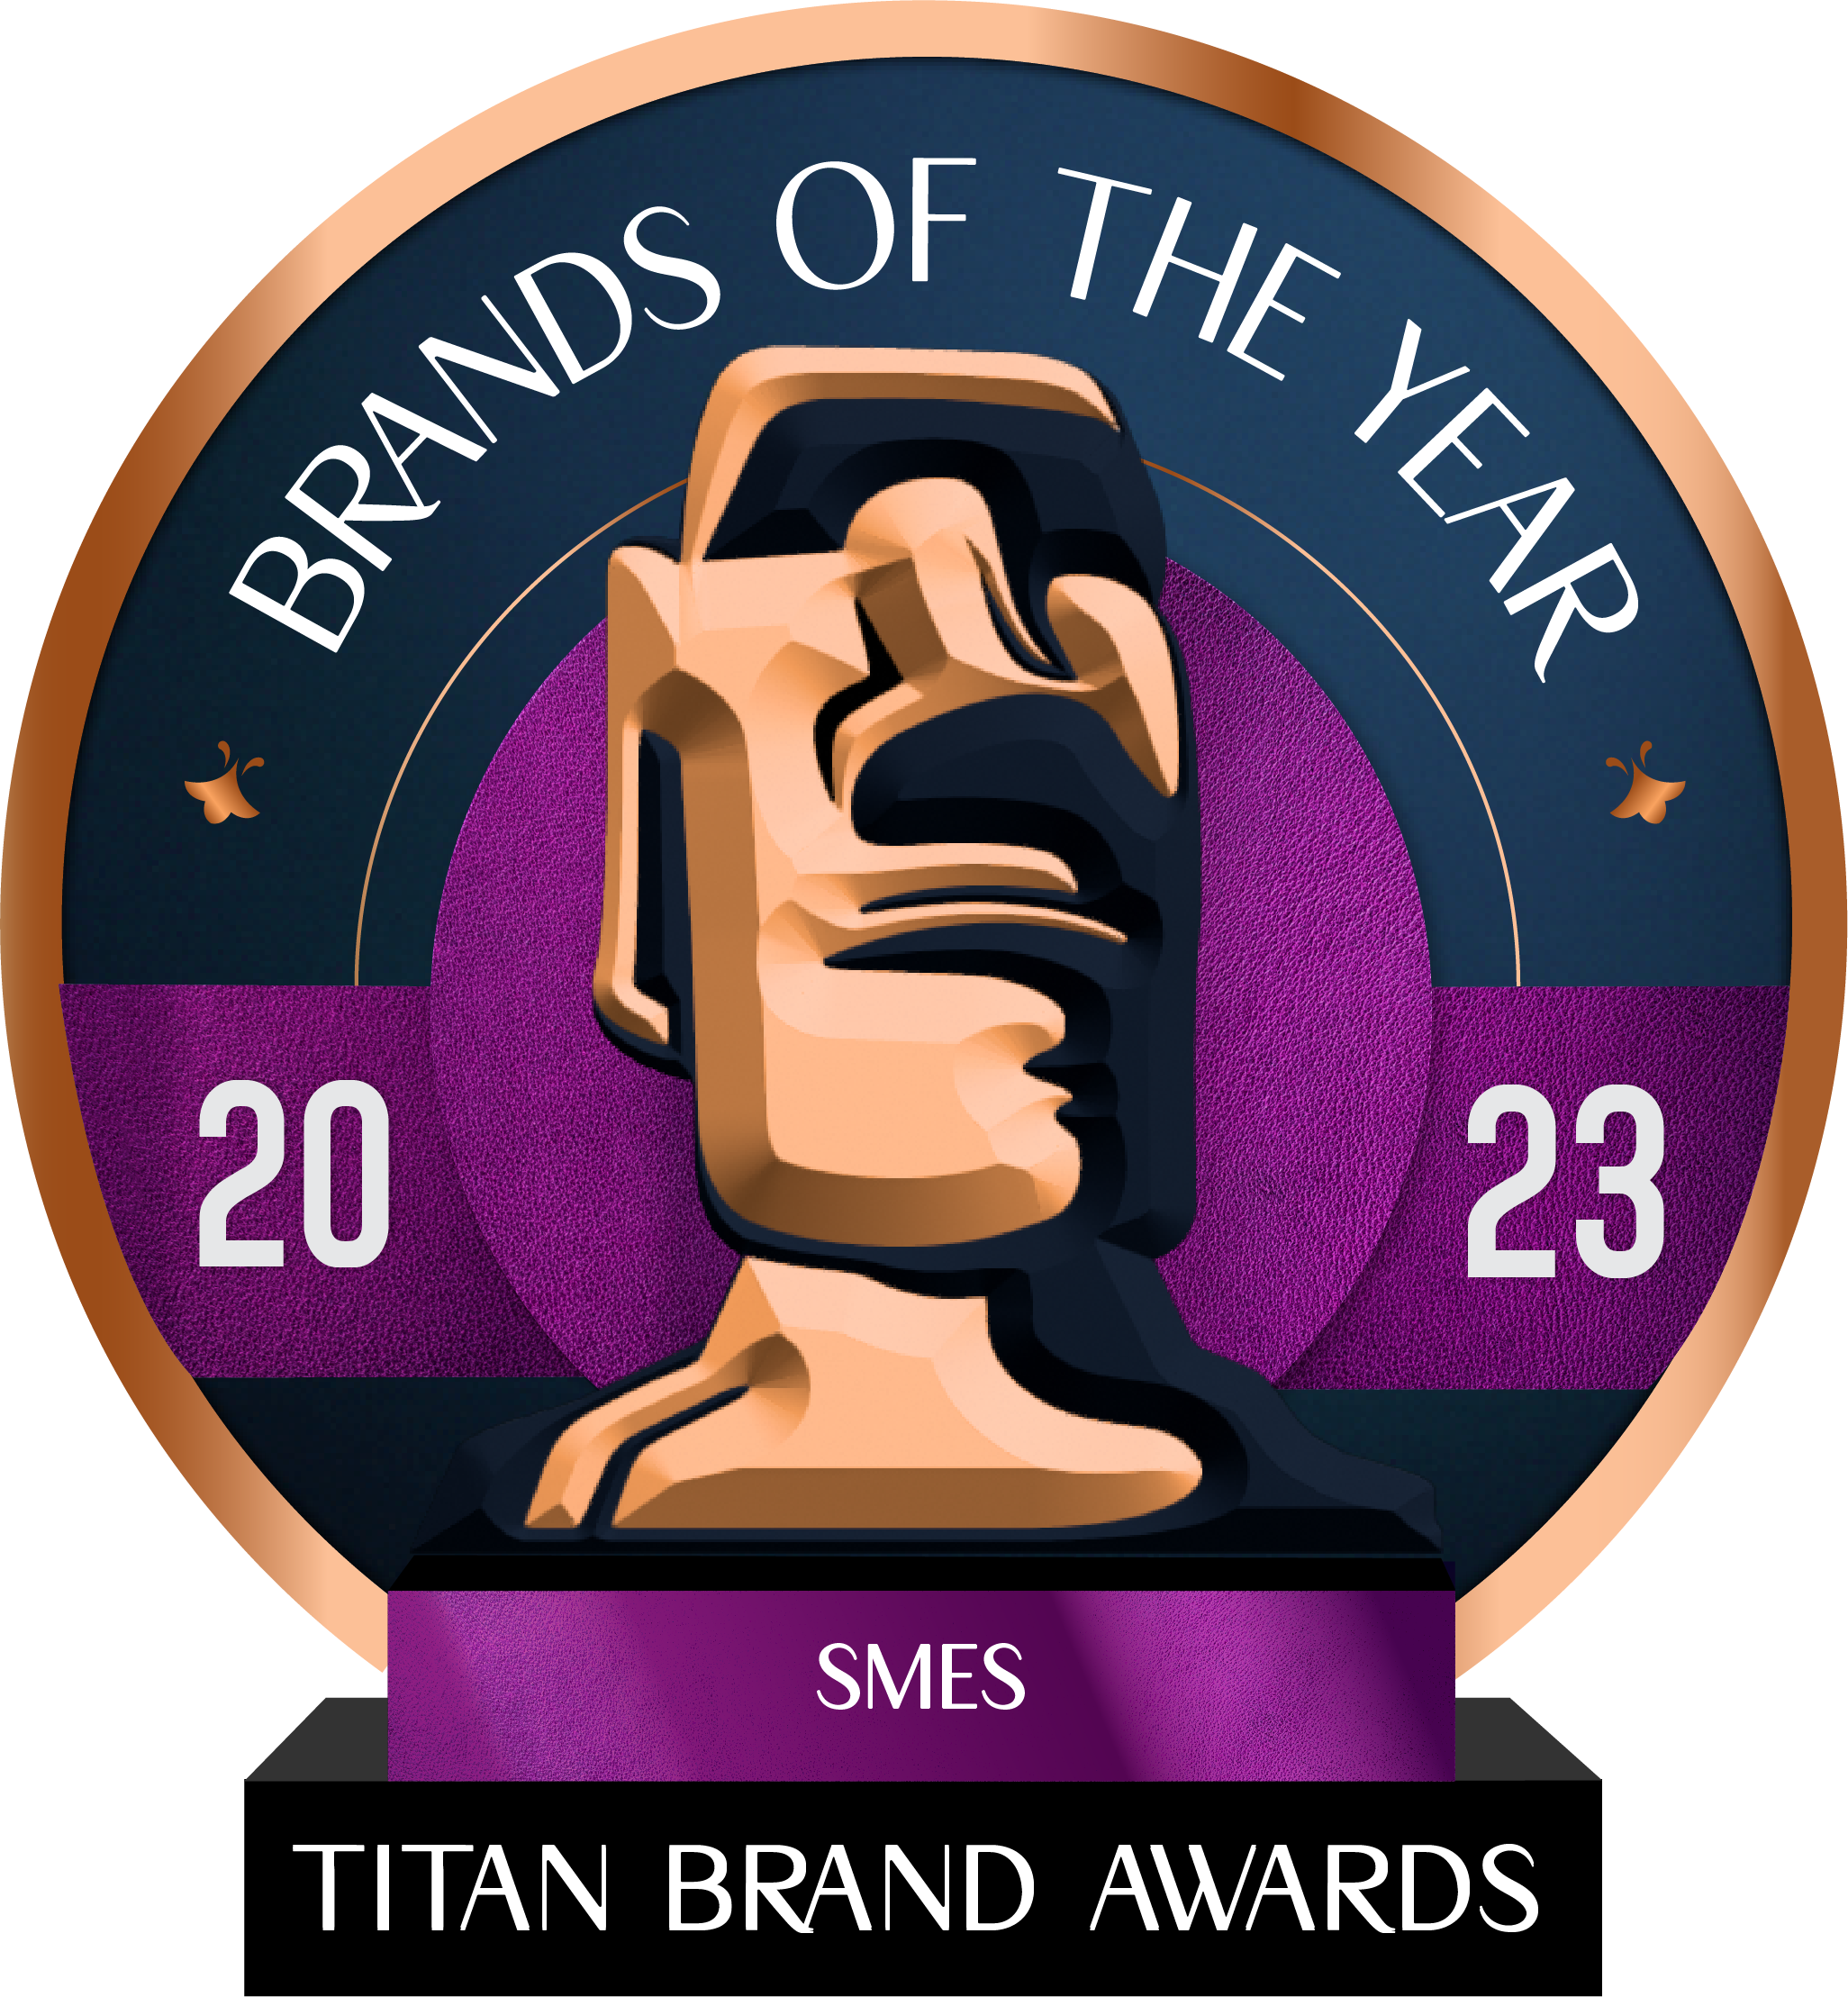 Brand of the Year Awards - Honoring future brand leaders and gems of tomorrow.